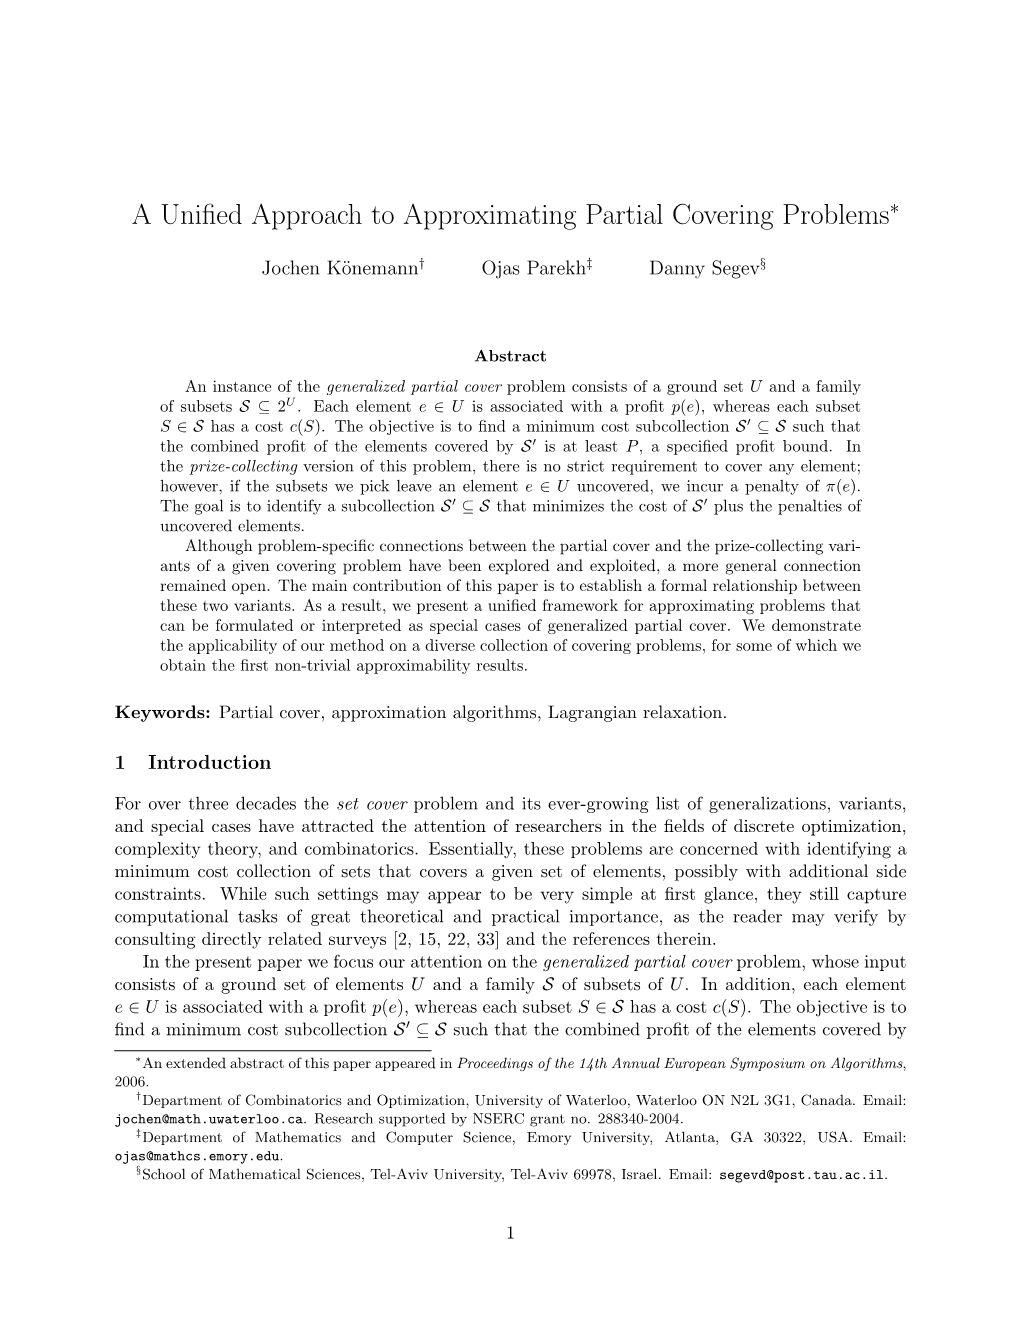 A Unified Approach to Approximating Partial Covering Problems